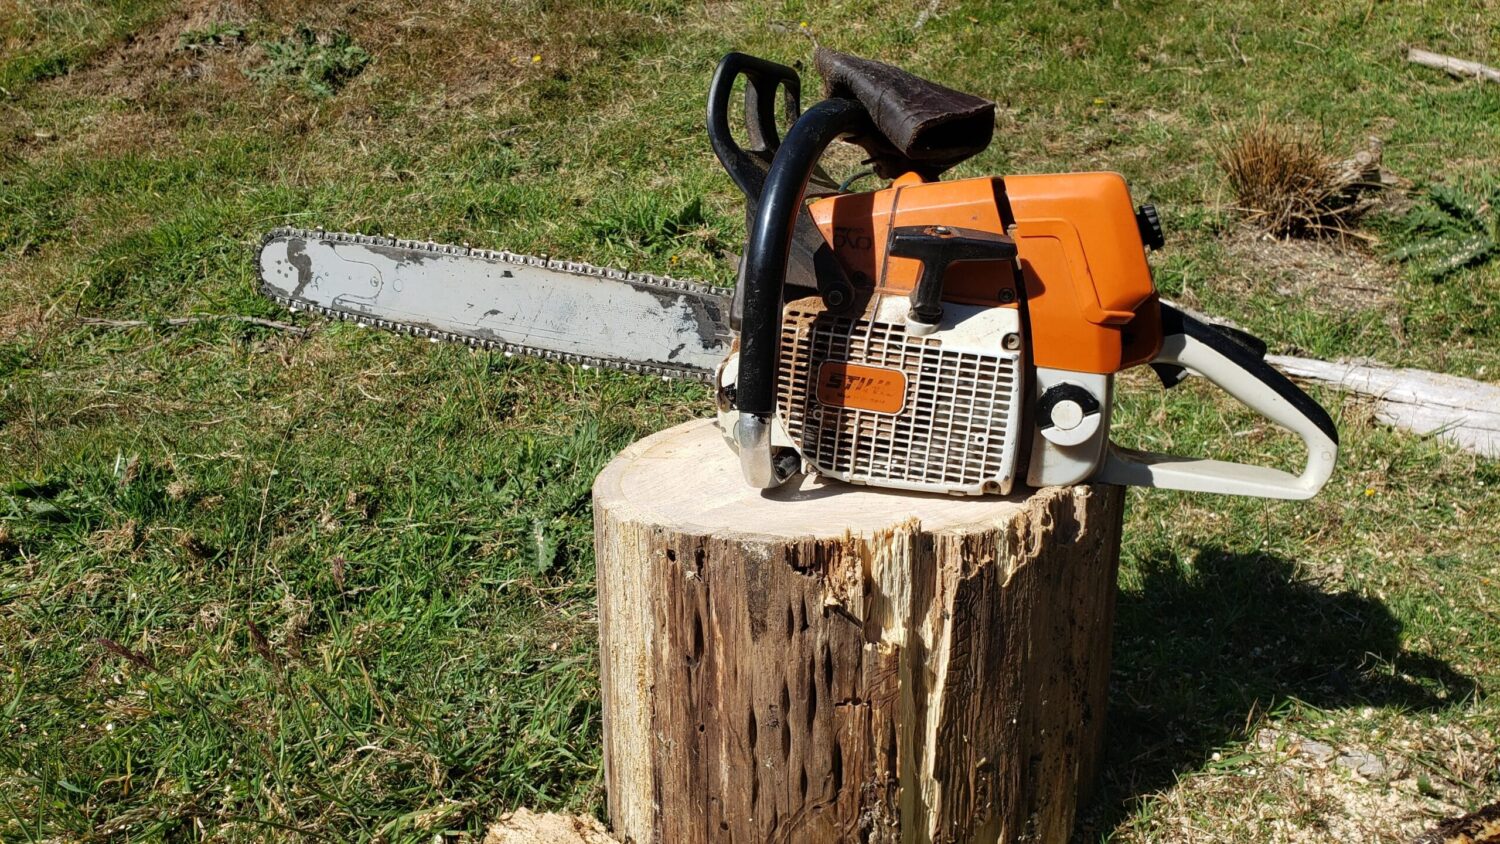 stihl ms440 chainsaw review